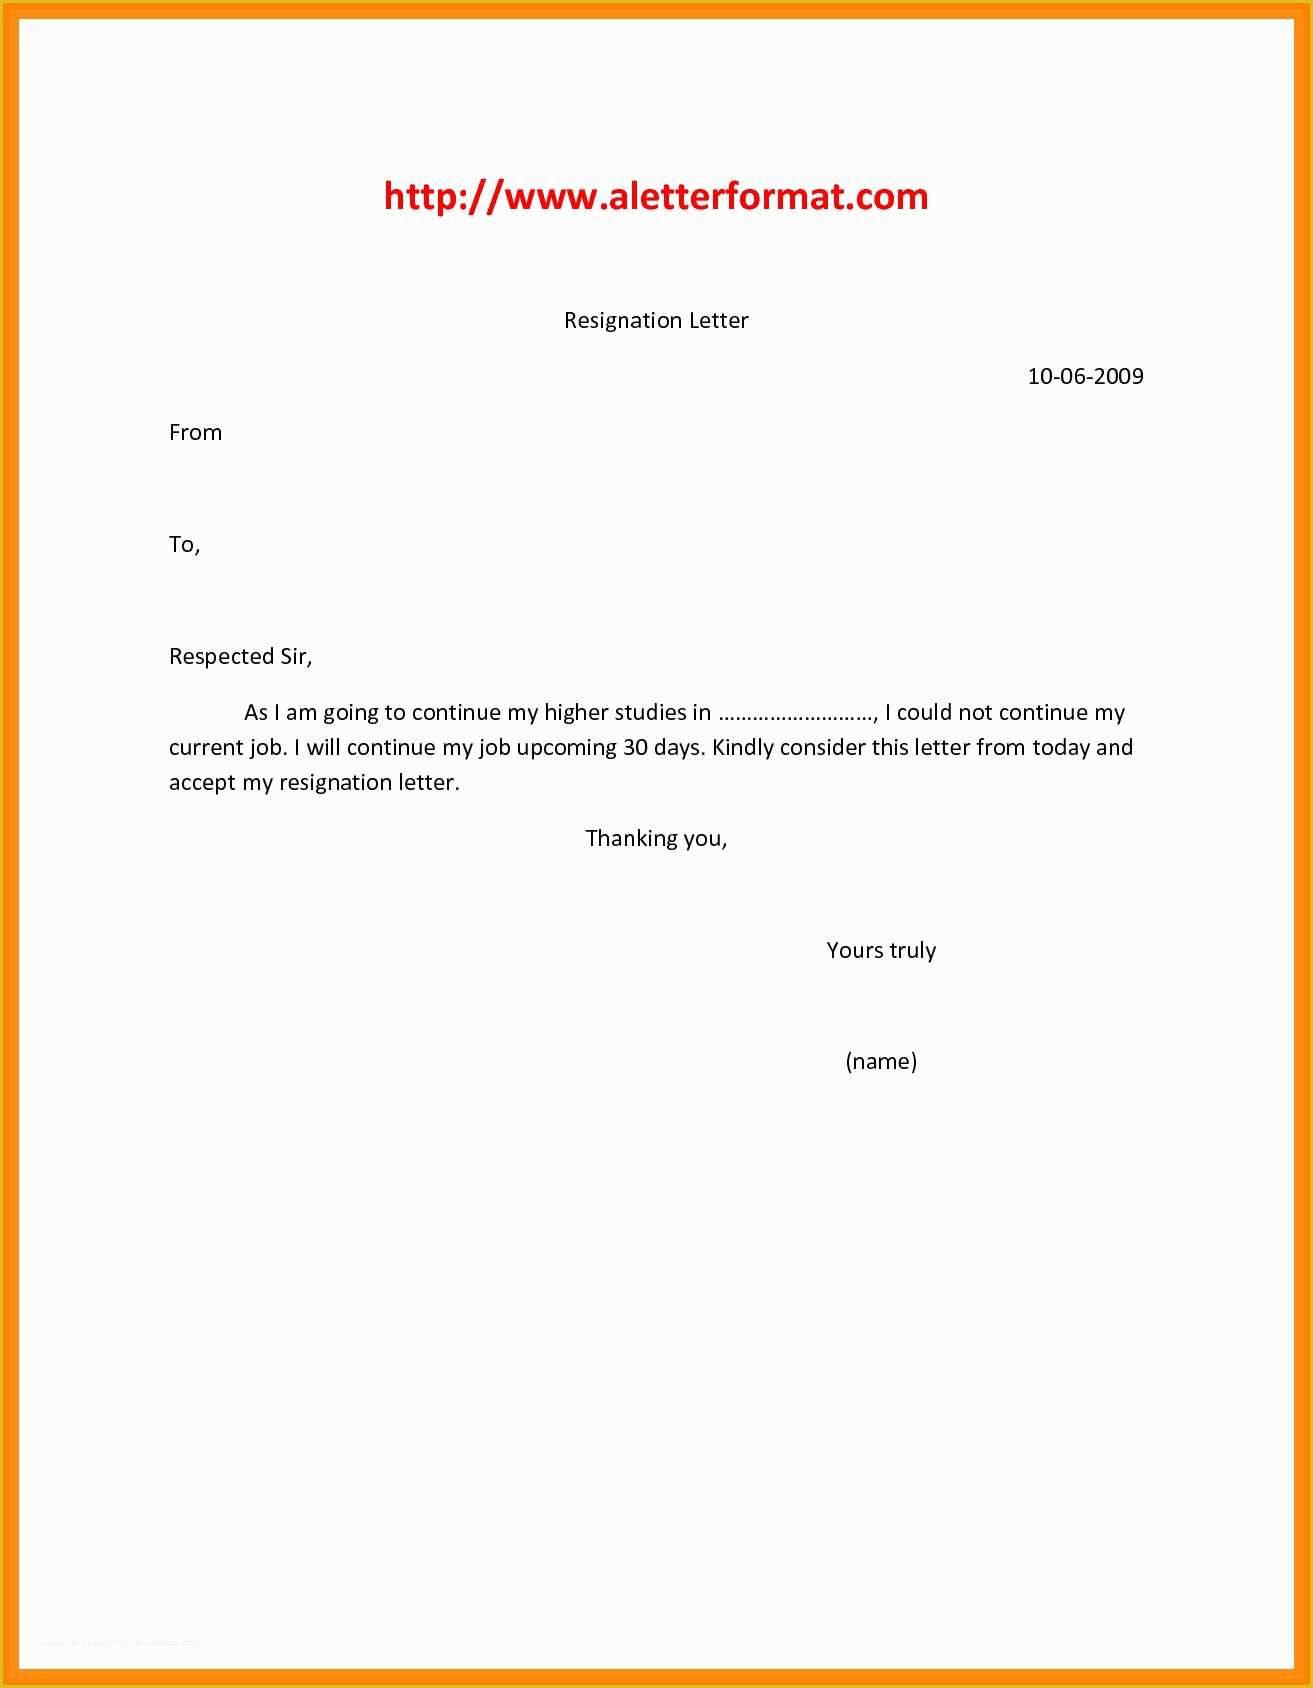 Resignation Letter Free Template Download Of Resignation Letter Template Free Download Collection